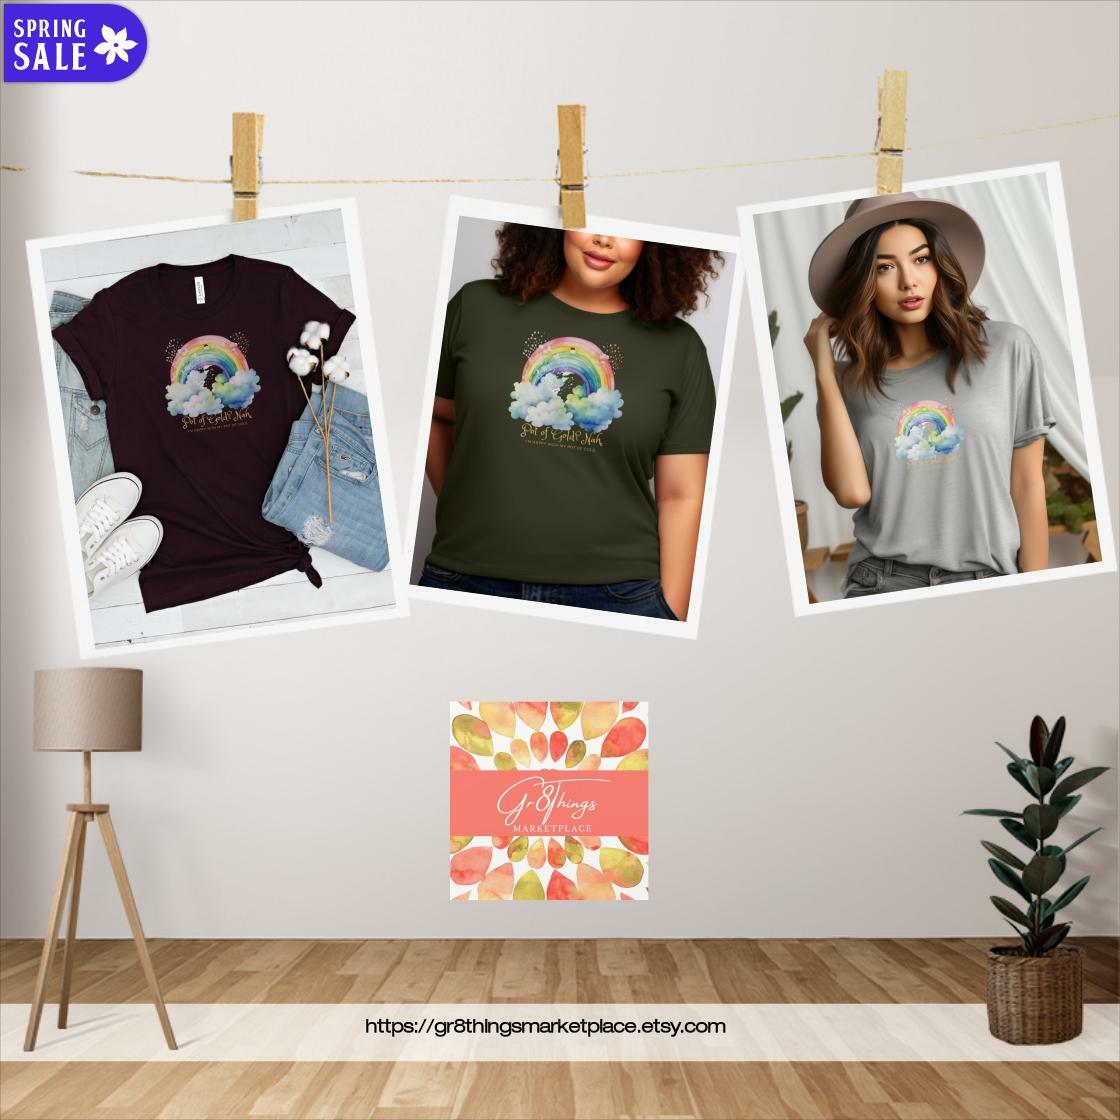 Ready for an epic shopping spree? Pot of Gold Rainbow Goblincore Shirt, Cottagecore Chic Tee, Naturecore Boho Wear, Nature and Botanical Gift, Green Witch, Pride, at a mind-blowing price of $22.99 Don't wait!
gr8thingsmarketplace.etsy.com/listing/164390…
#LGBTQ #Fantasycore